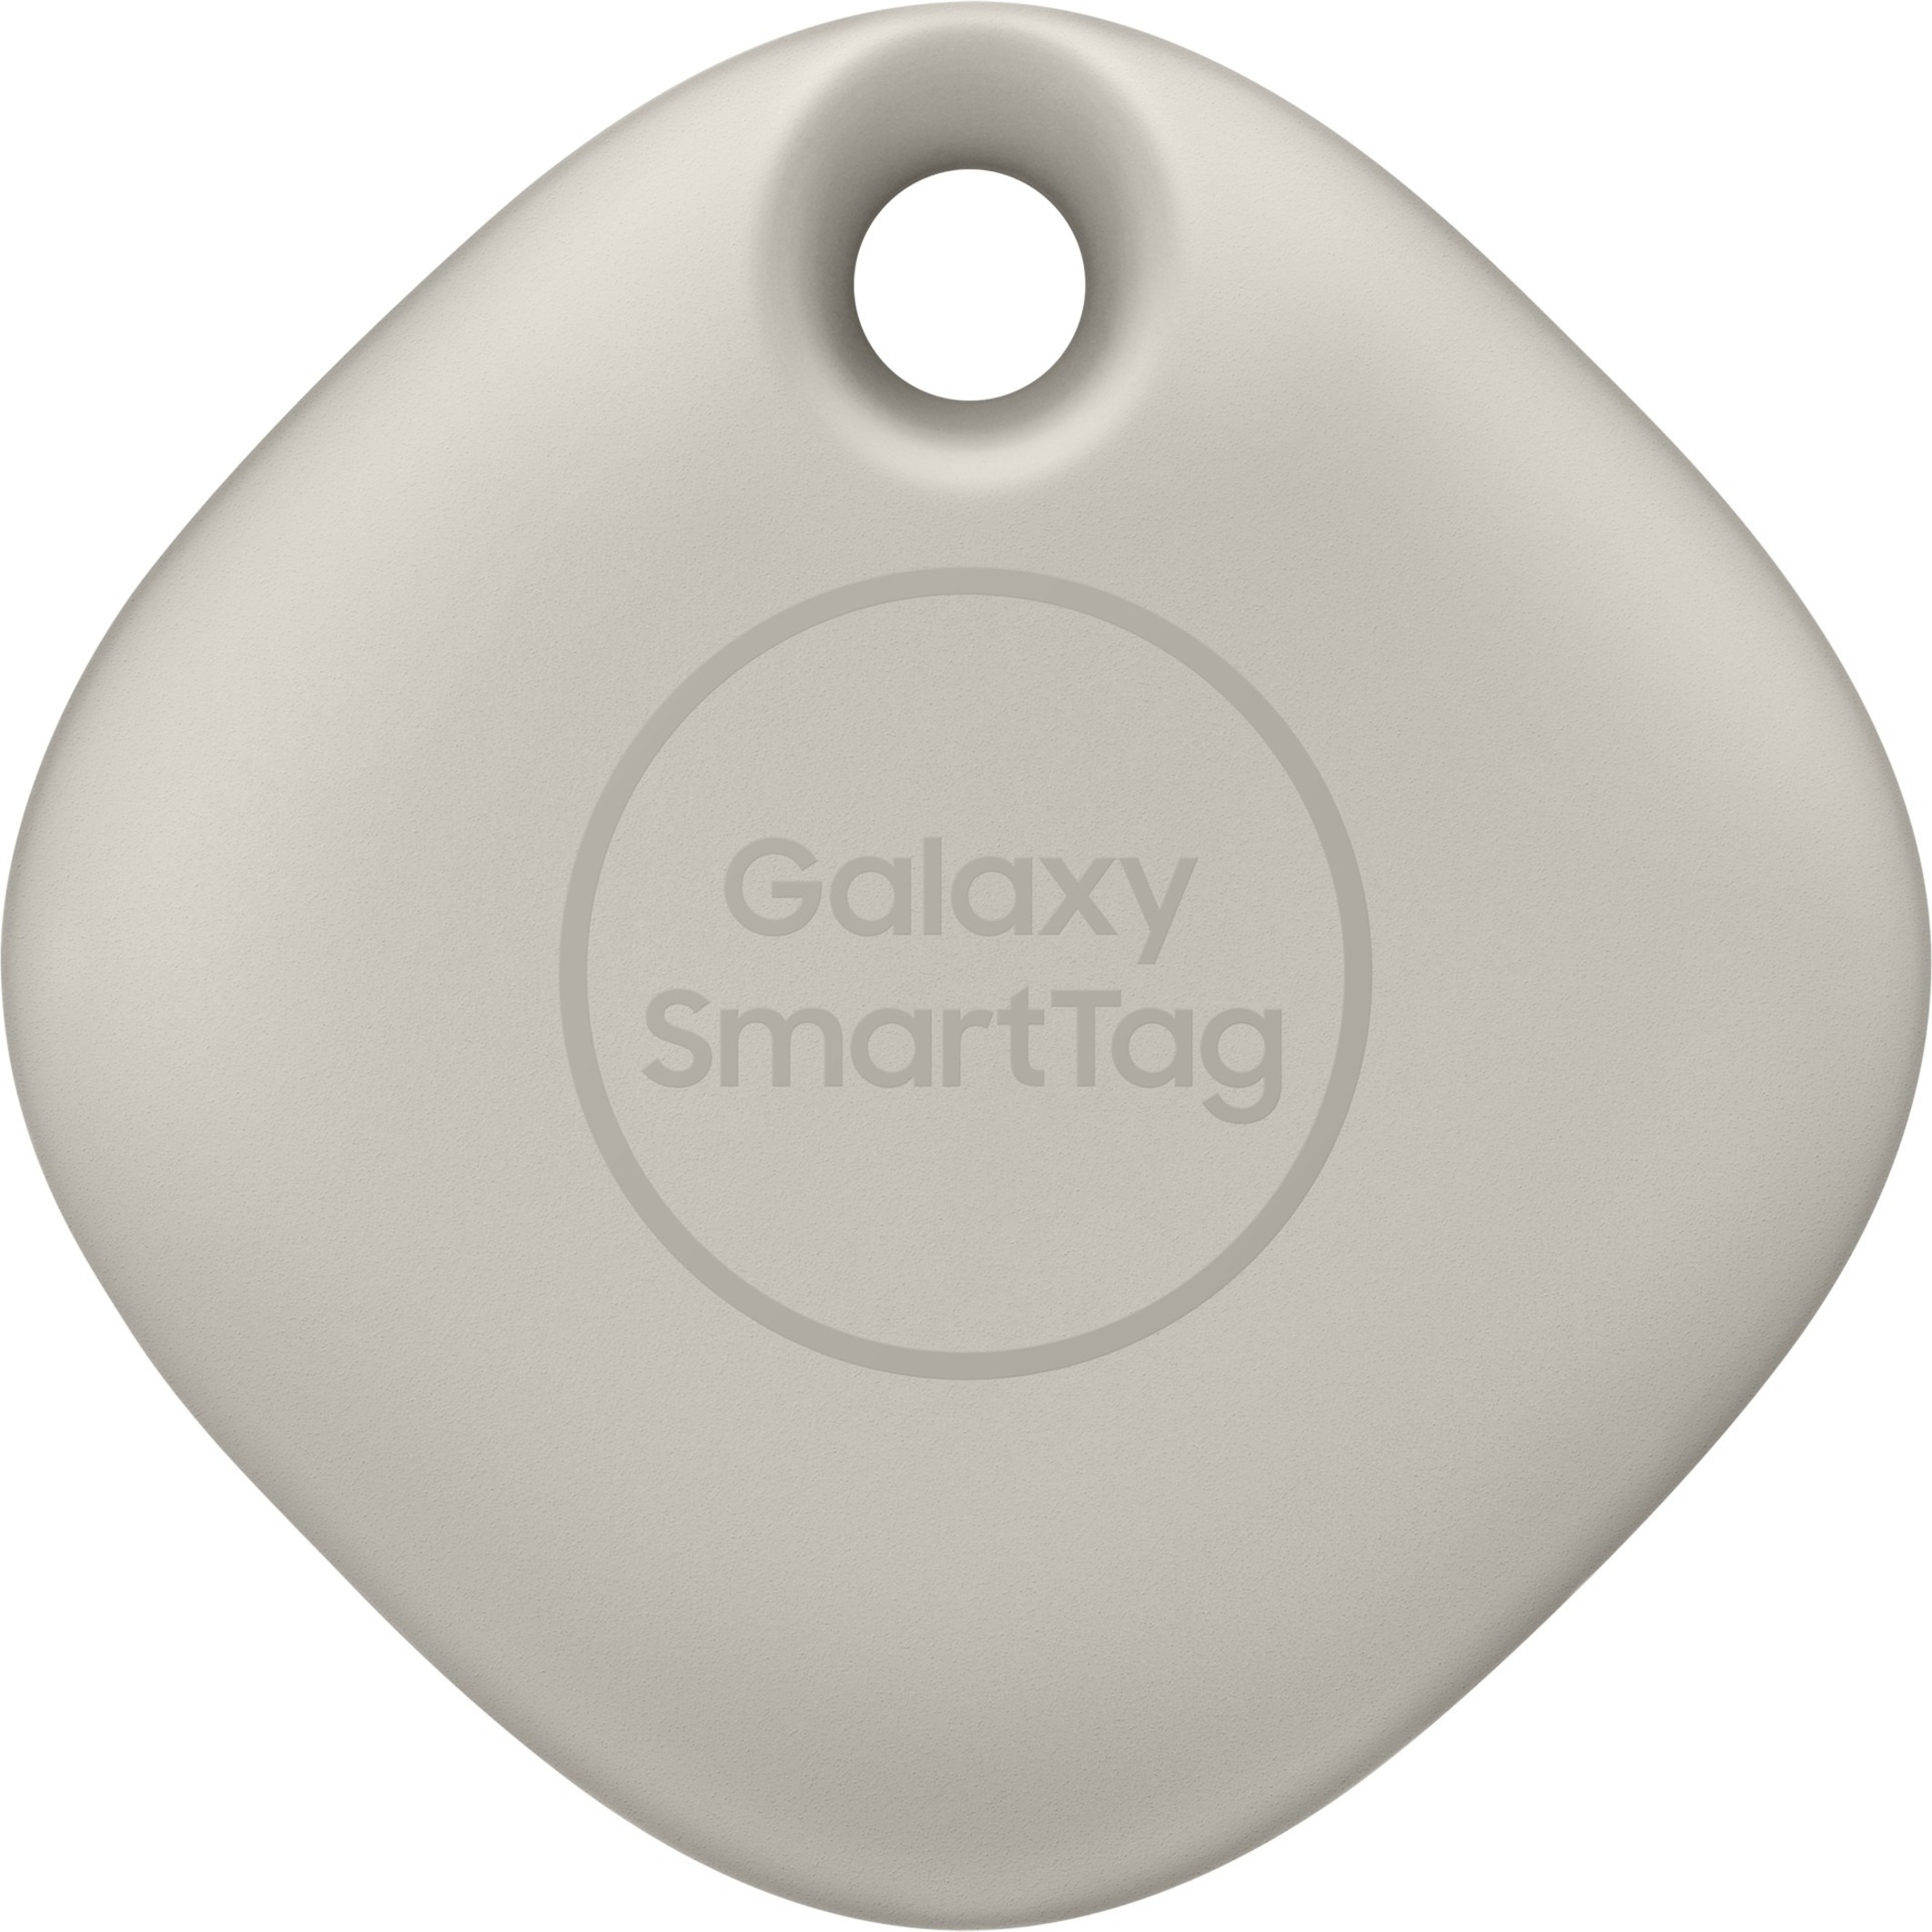 Samsung Galaxy SmartTag, 1-Pack, Oatmeal - image 1 of 8